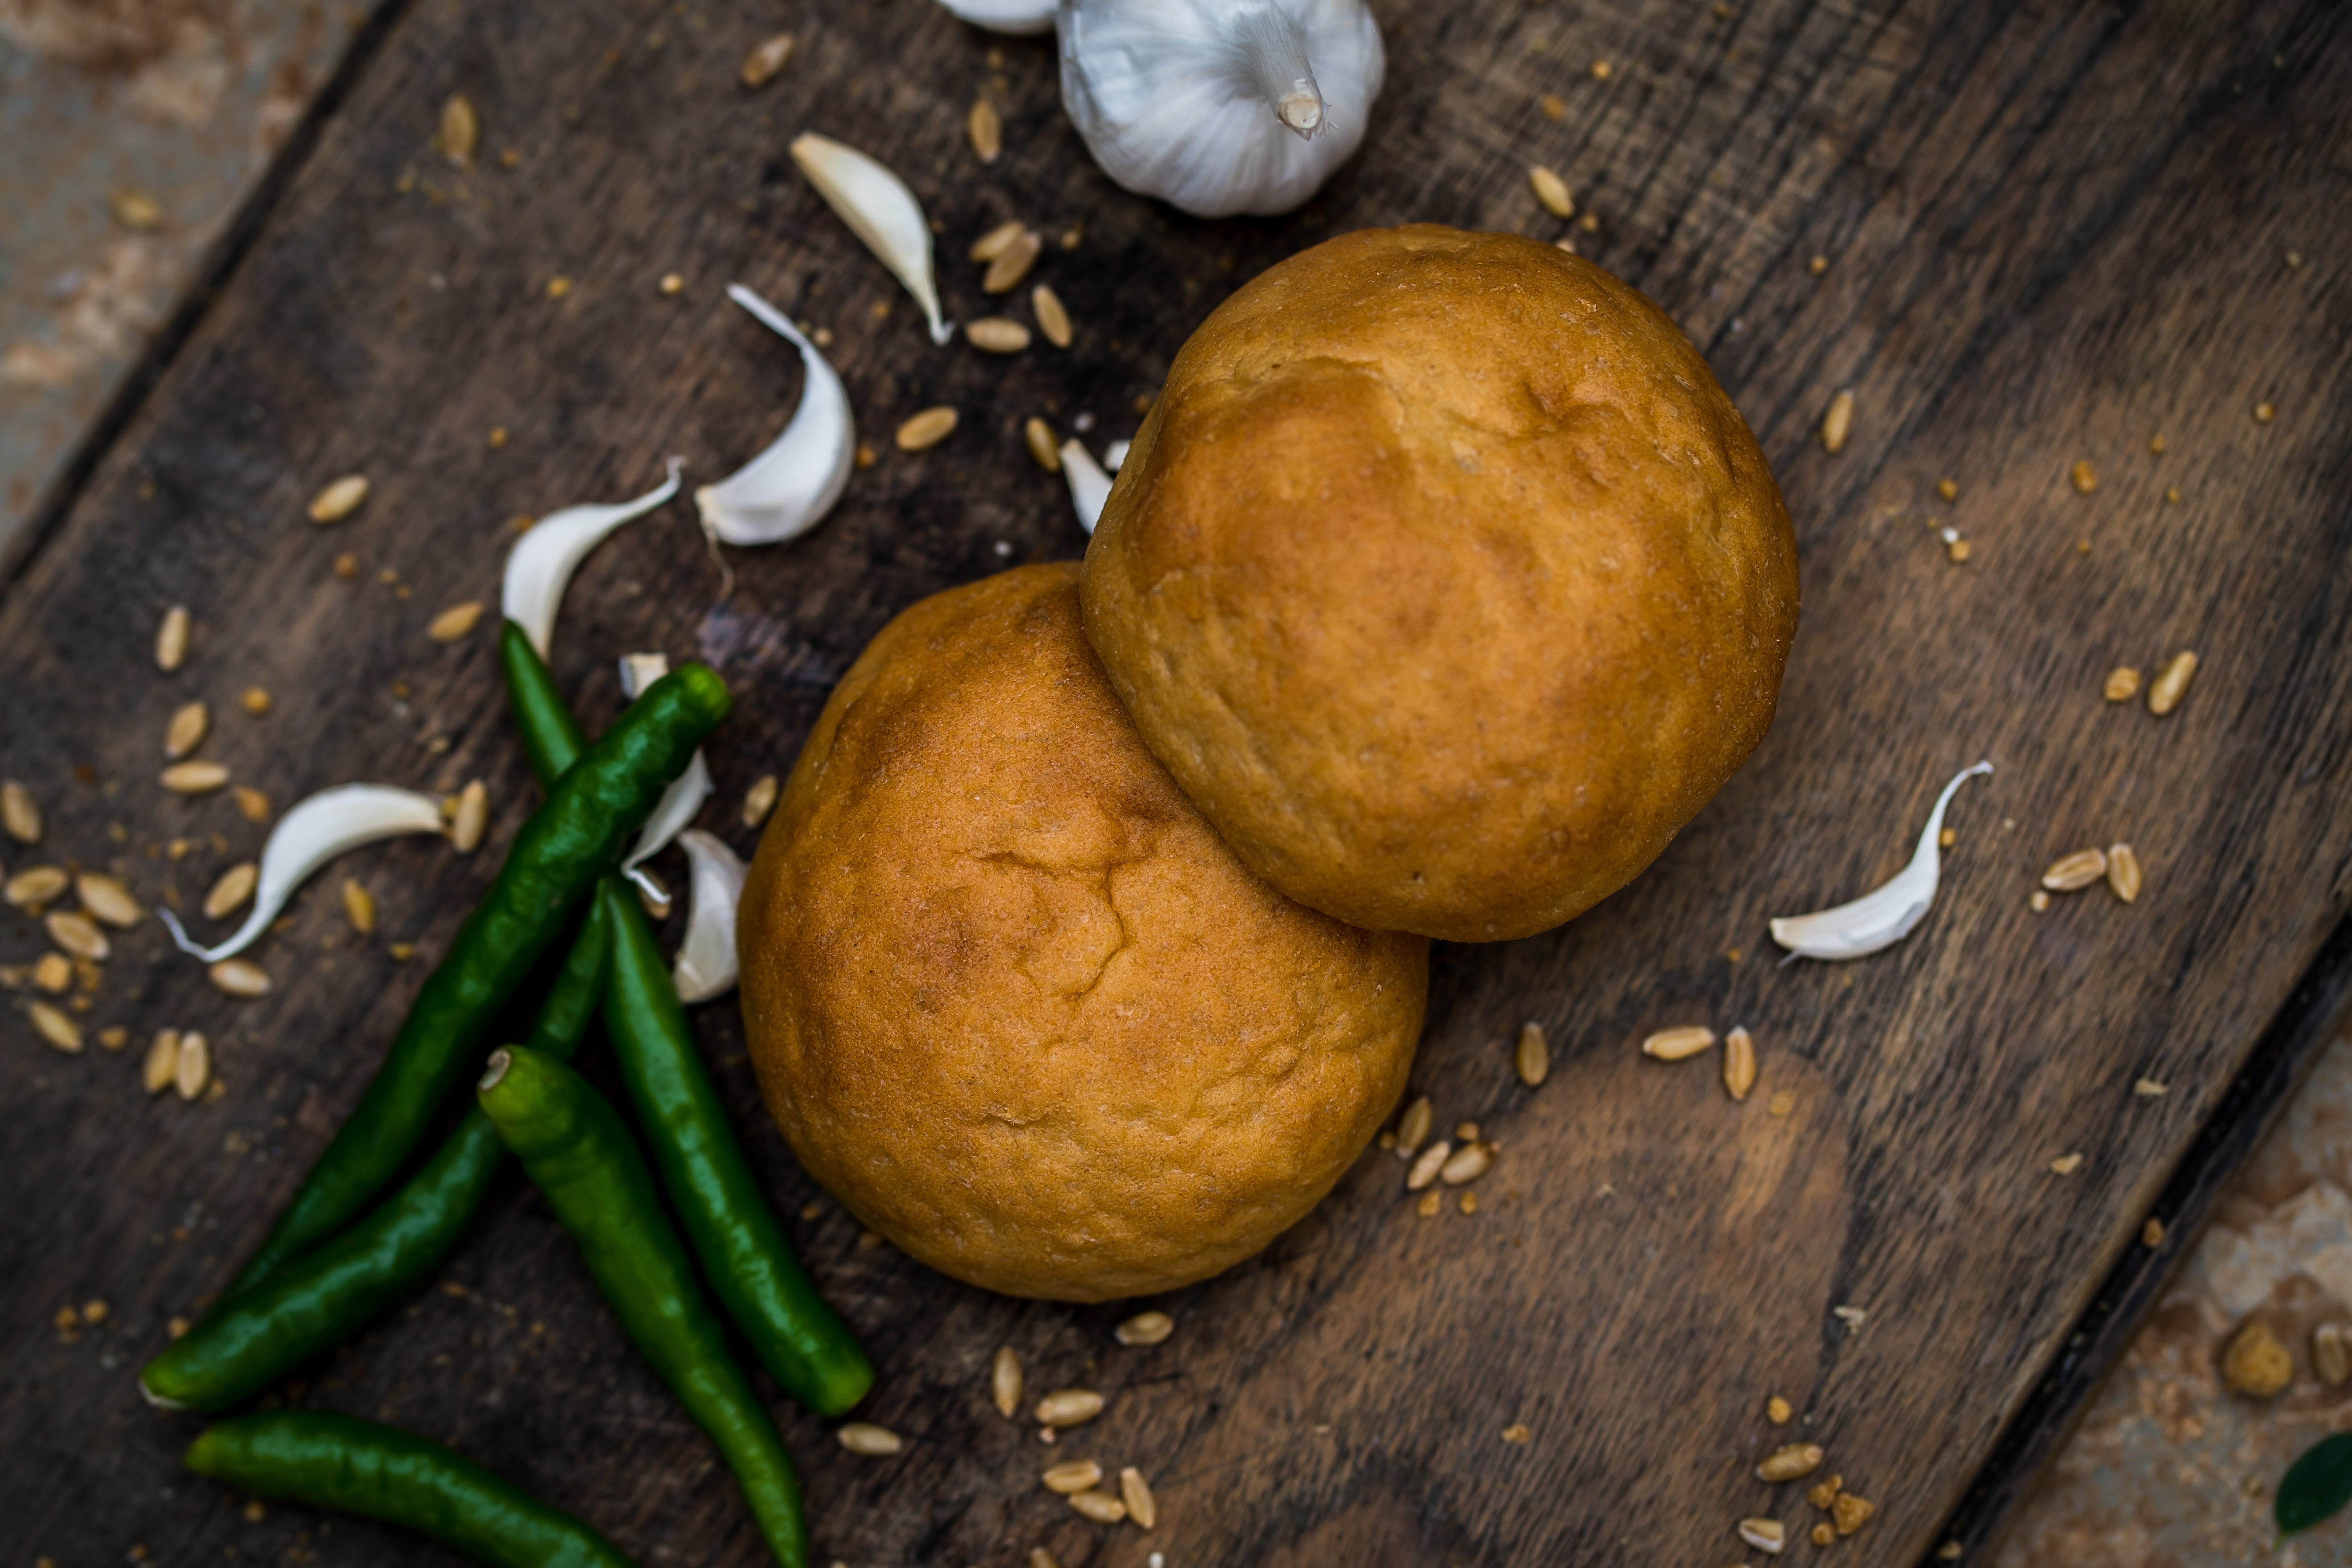 100% Whole Wheat Buns - Chilli Garlic  | Refined Sugar-Free | Eggless | No Maida | No Preservatives | Fibre Rich | 50g x 4 Buns (Available only in Bangalore)